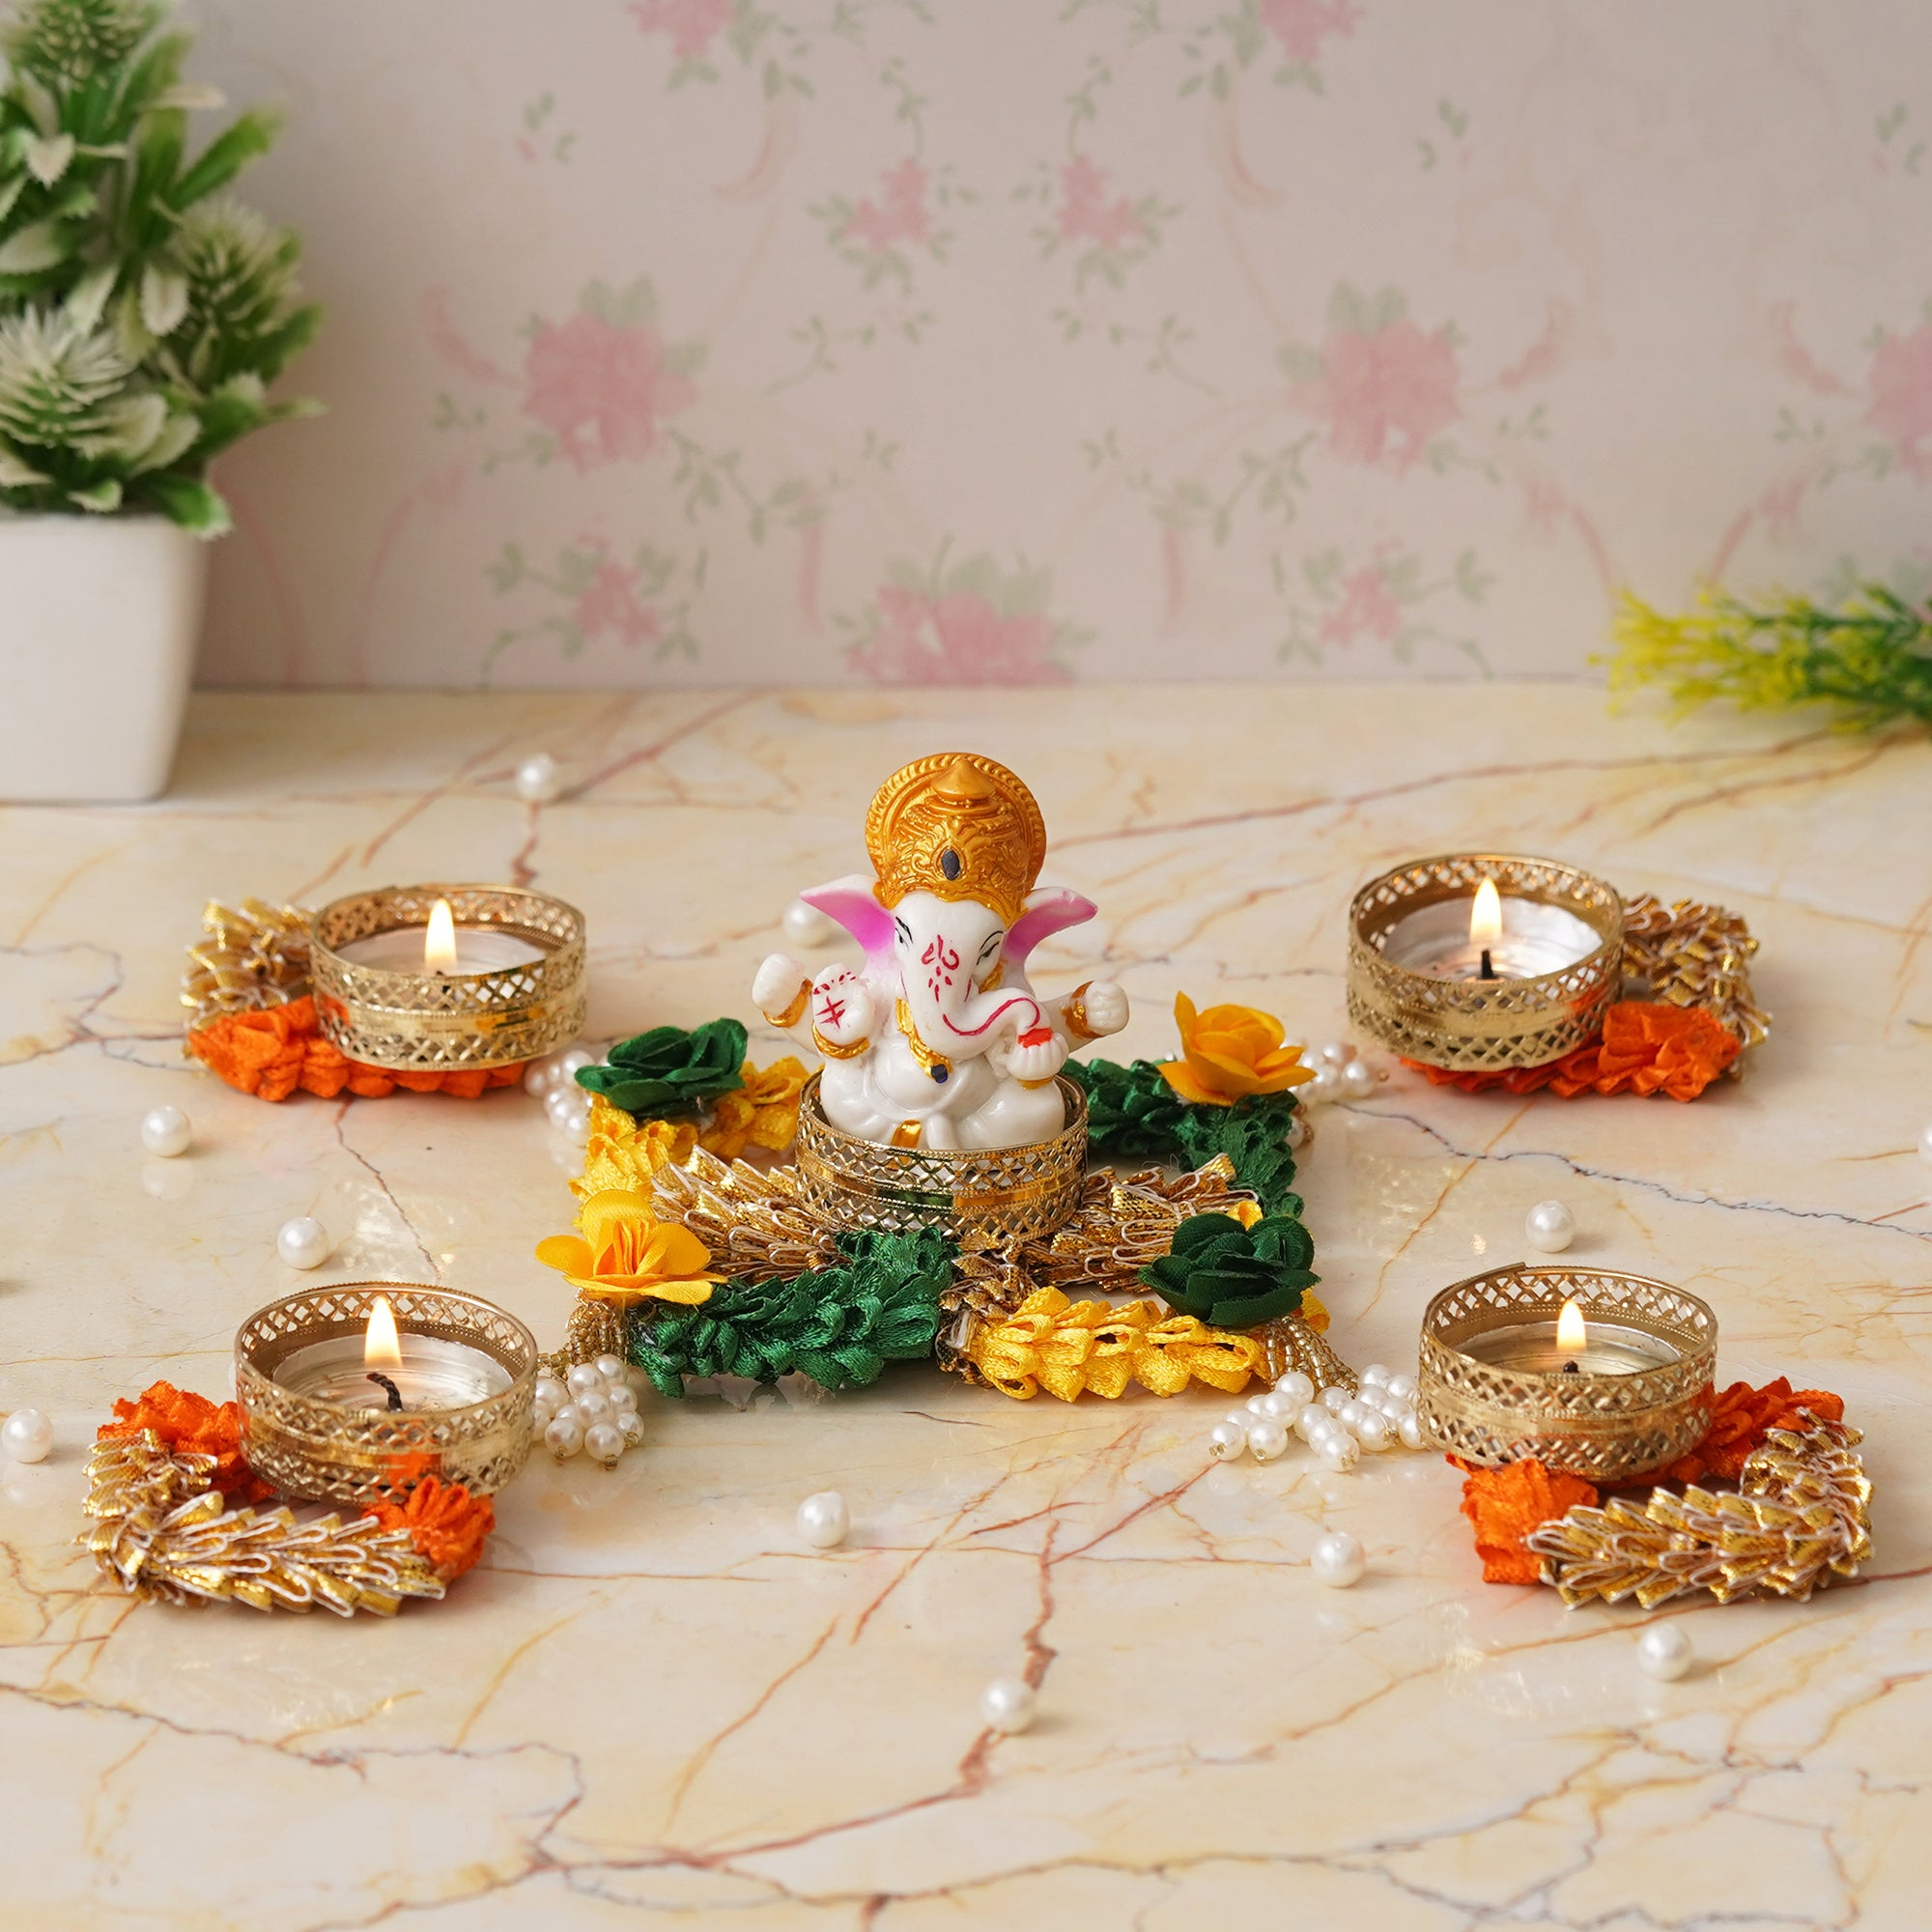 eCraftIndia Lord Ganesha Idol on Floral and Beads Embellished Handcrafted Plate with 4 Decorative Tea Light Candle Holders 1